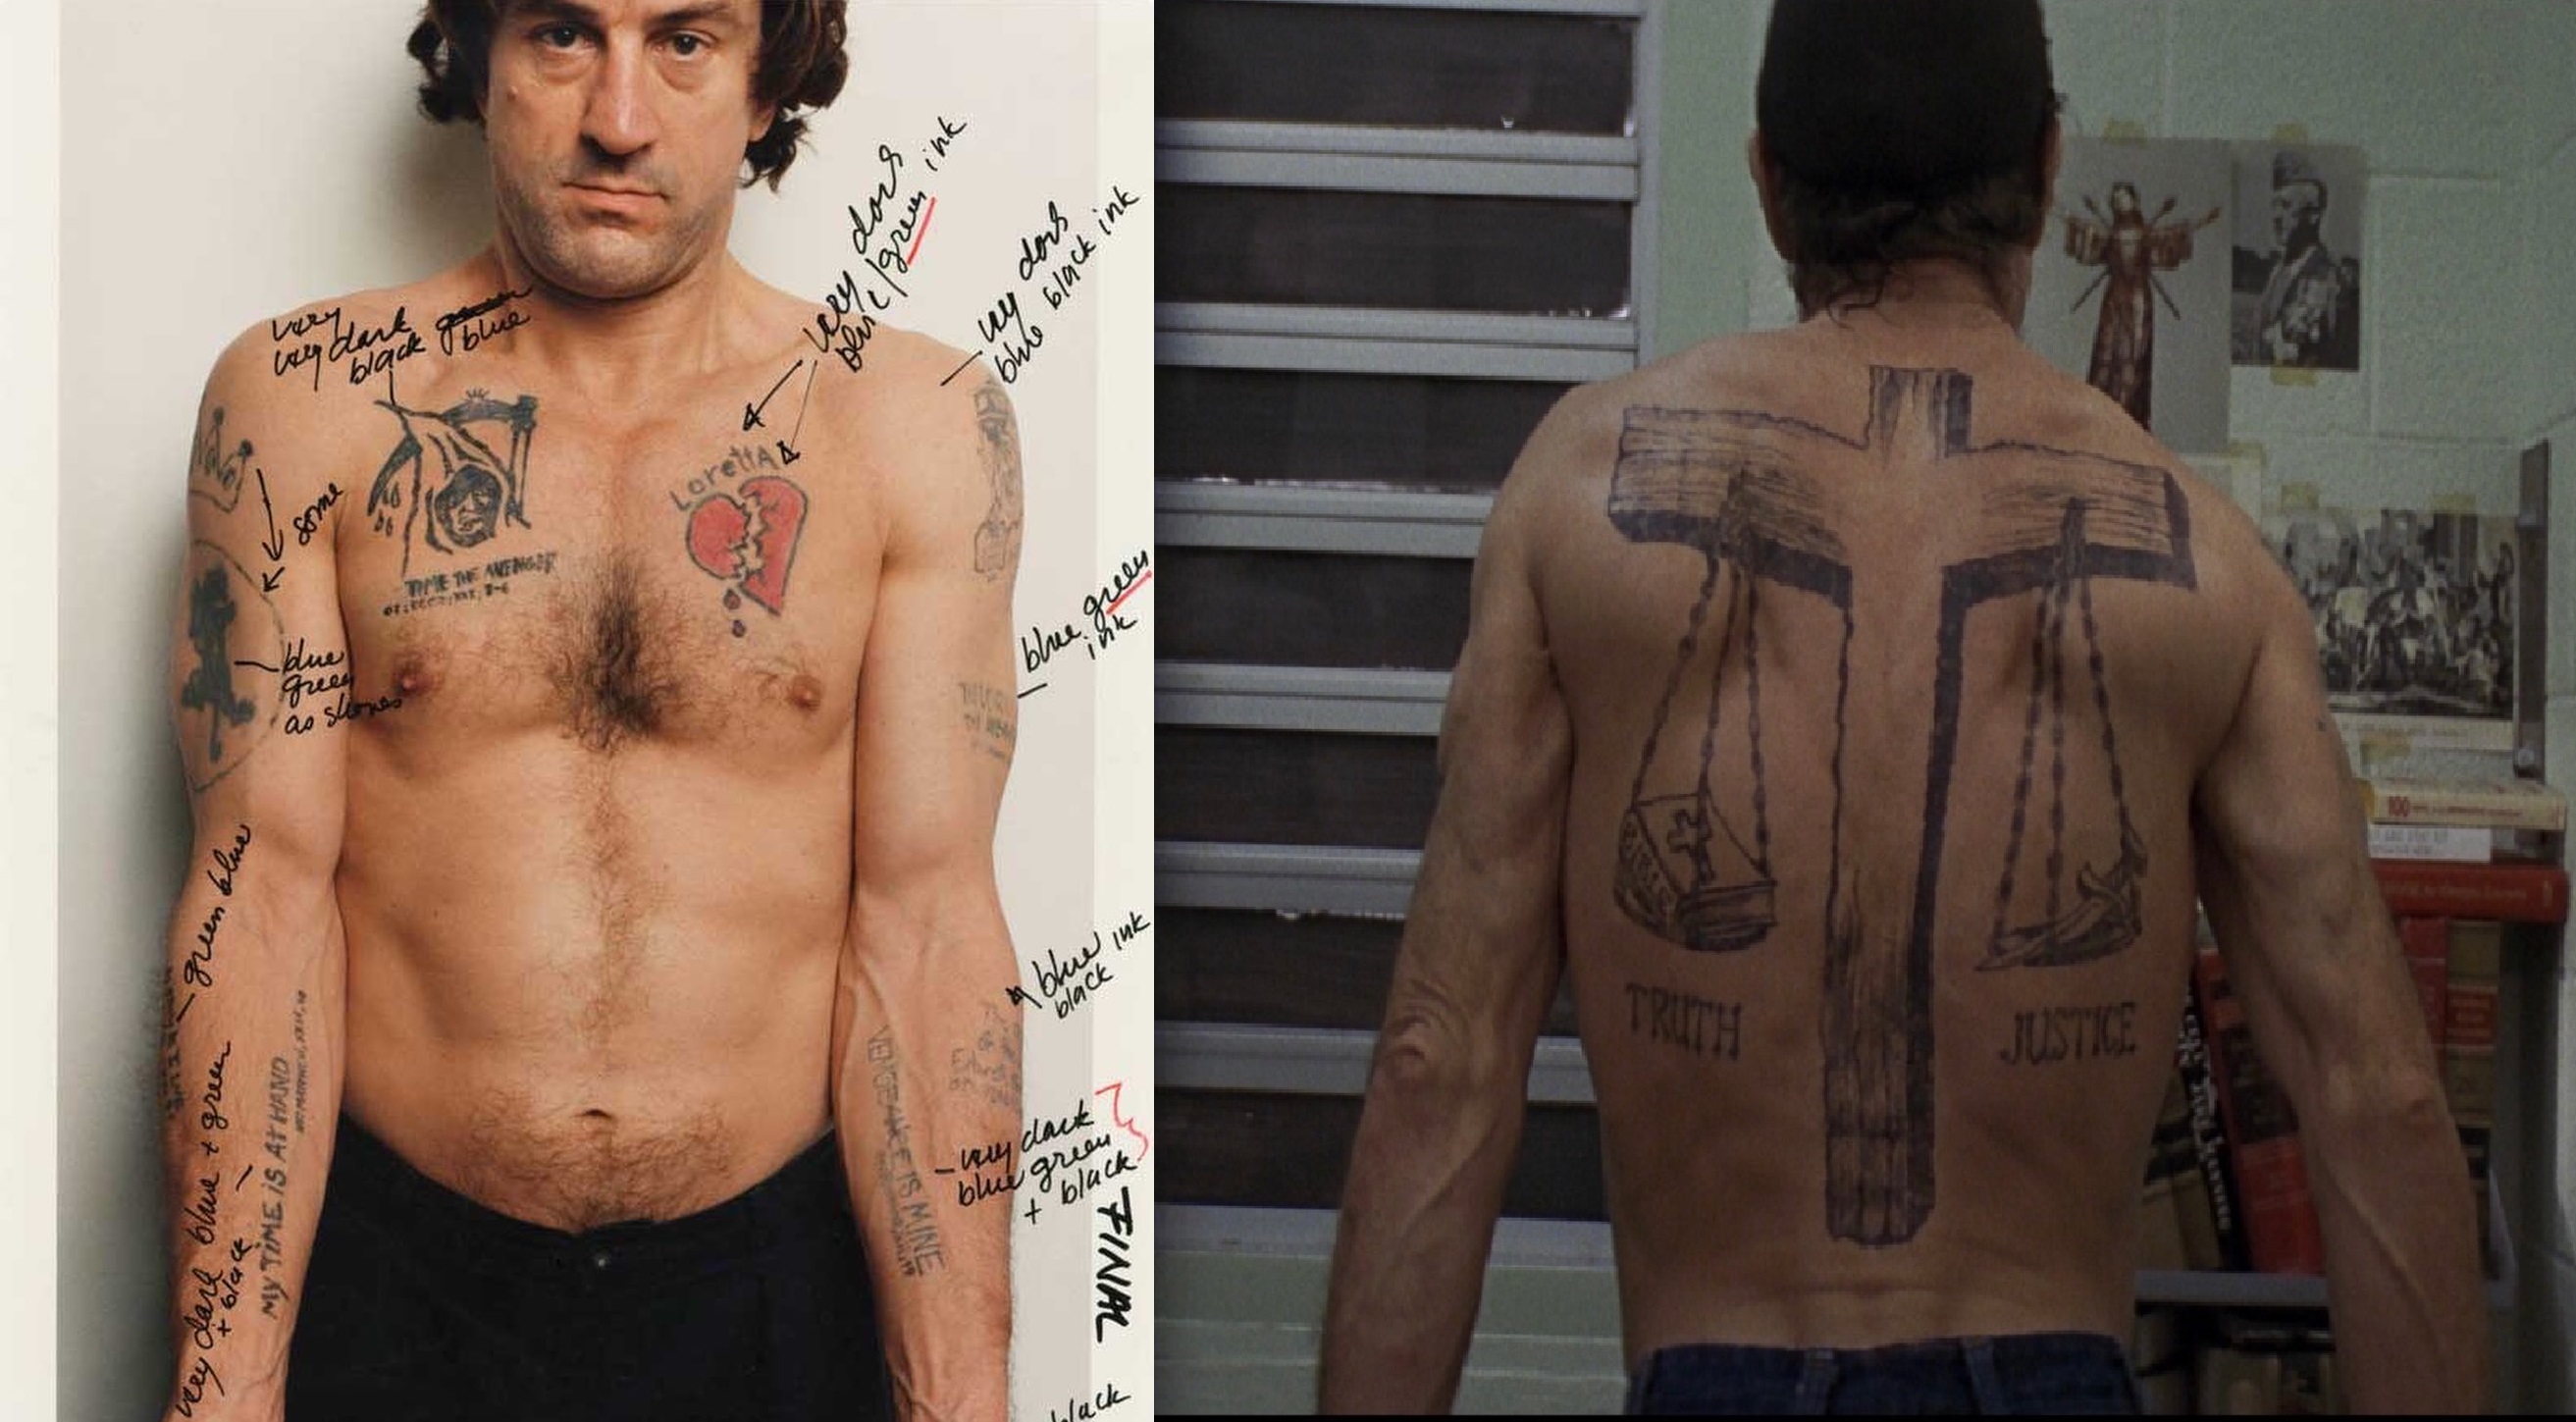 The Good, the Bad, and the Personal: Tattoos im Film (pt I)